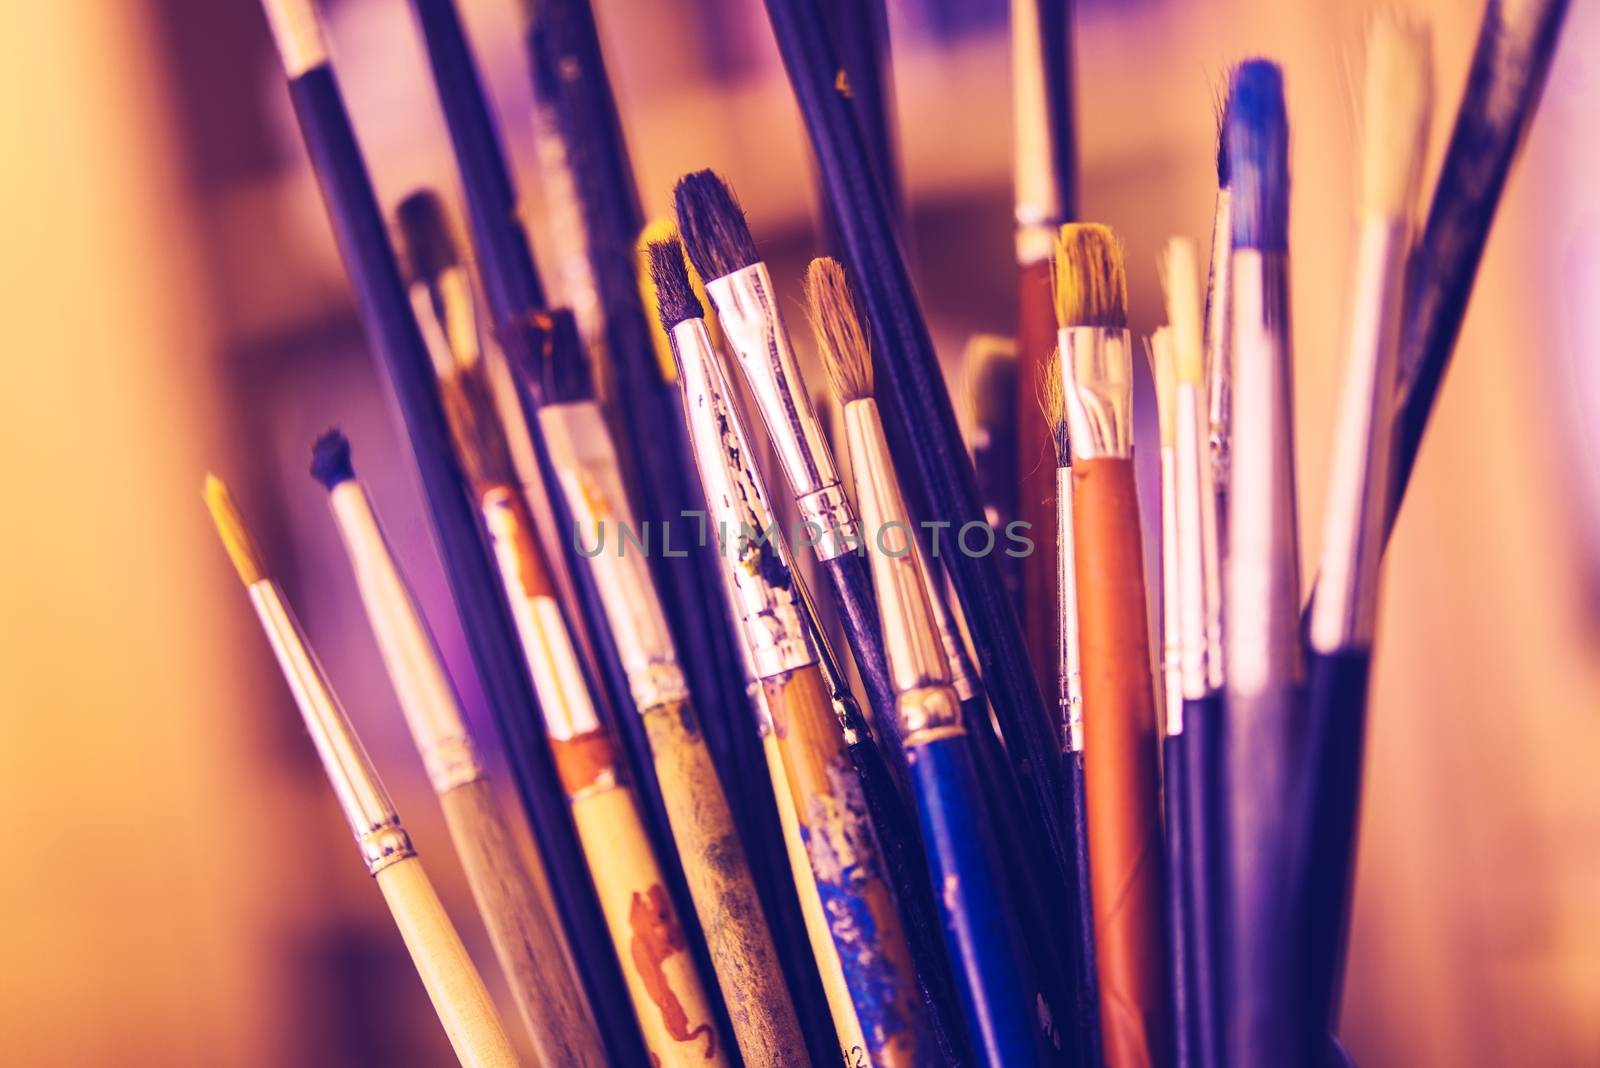 Dirty Oil Paintbrushes by welcomia